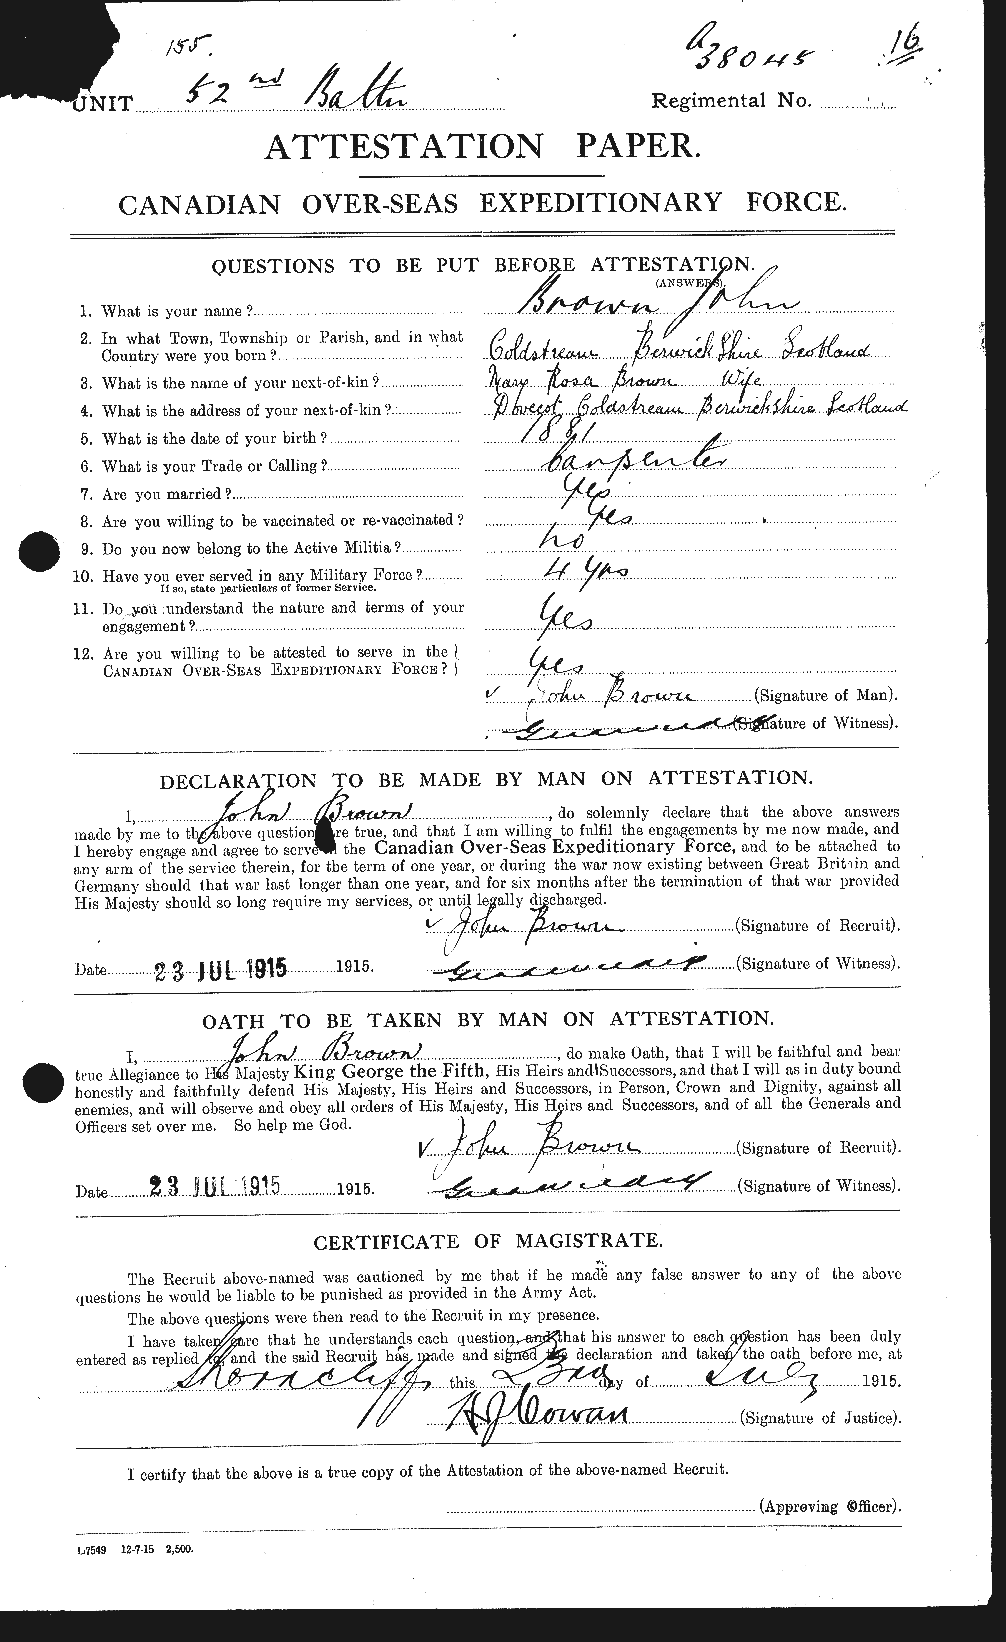 Personnel Records of the First World War - CEF 264531a